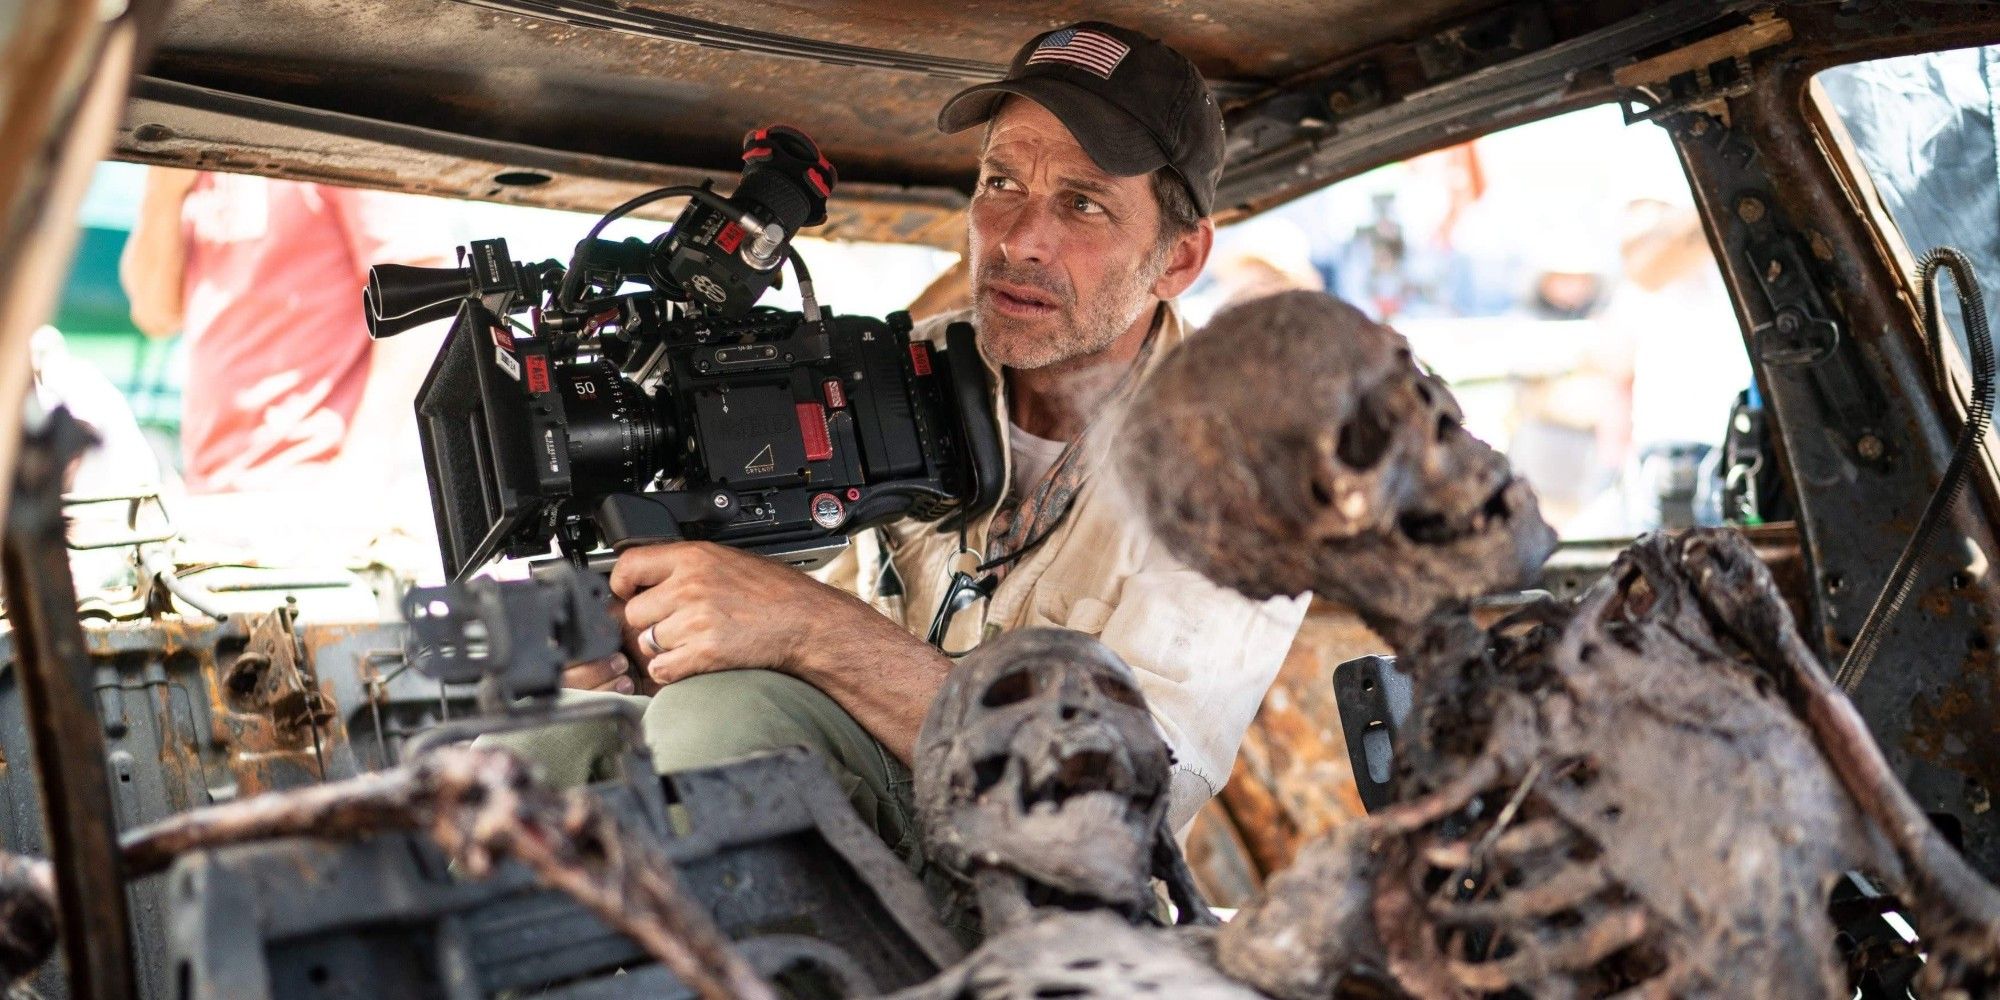 The story of Zack Snyder’s army of the dead is an assault full of zombies